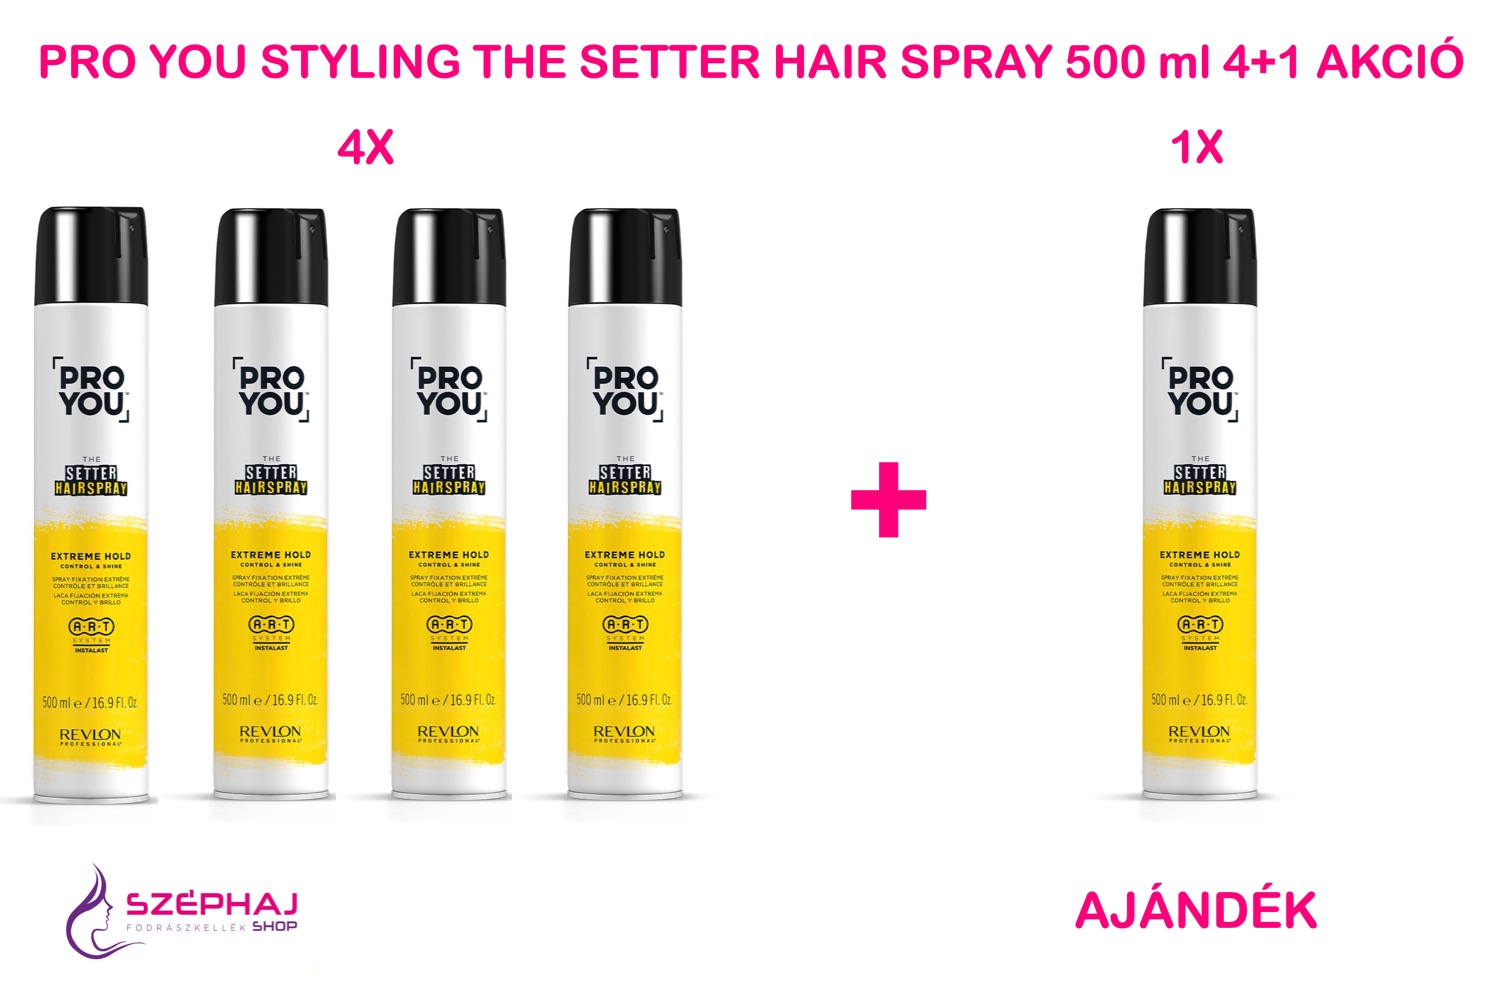 PRO YOU THE SETTER Hair Spray Extreme Hold 500 ml 4+1 AKCIÓ